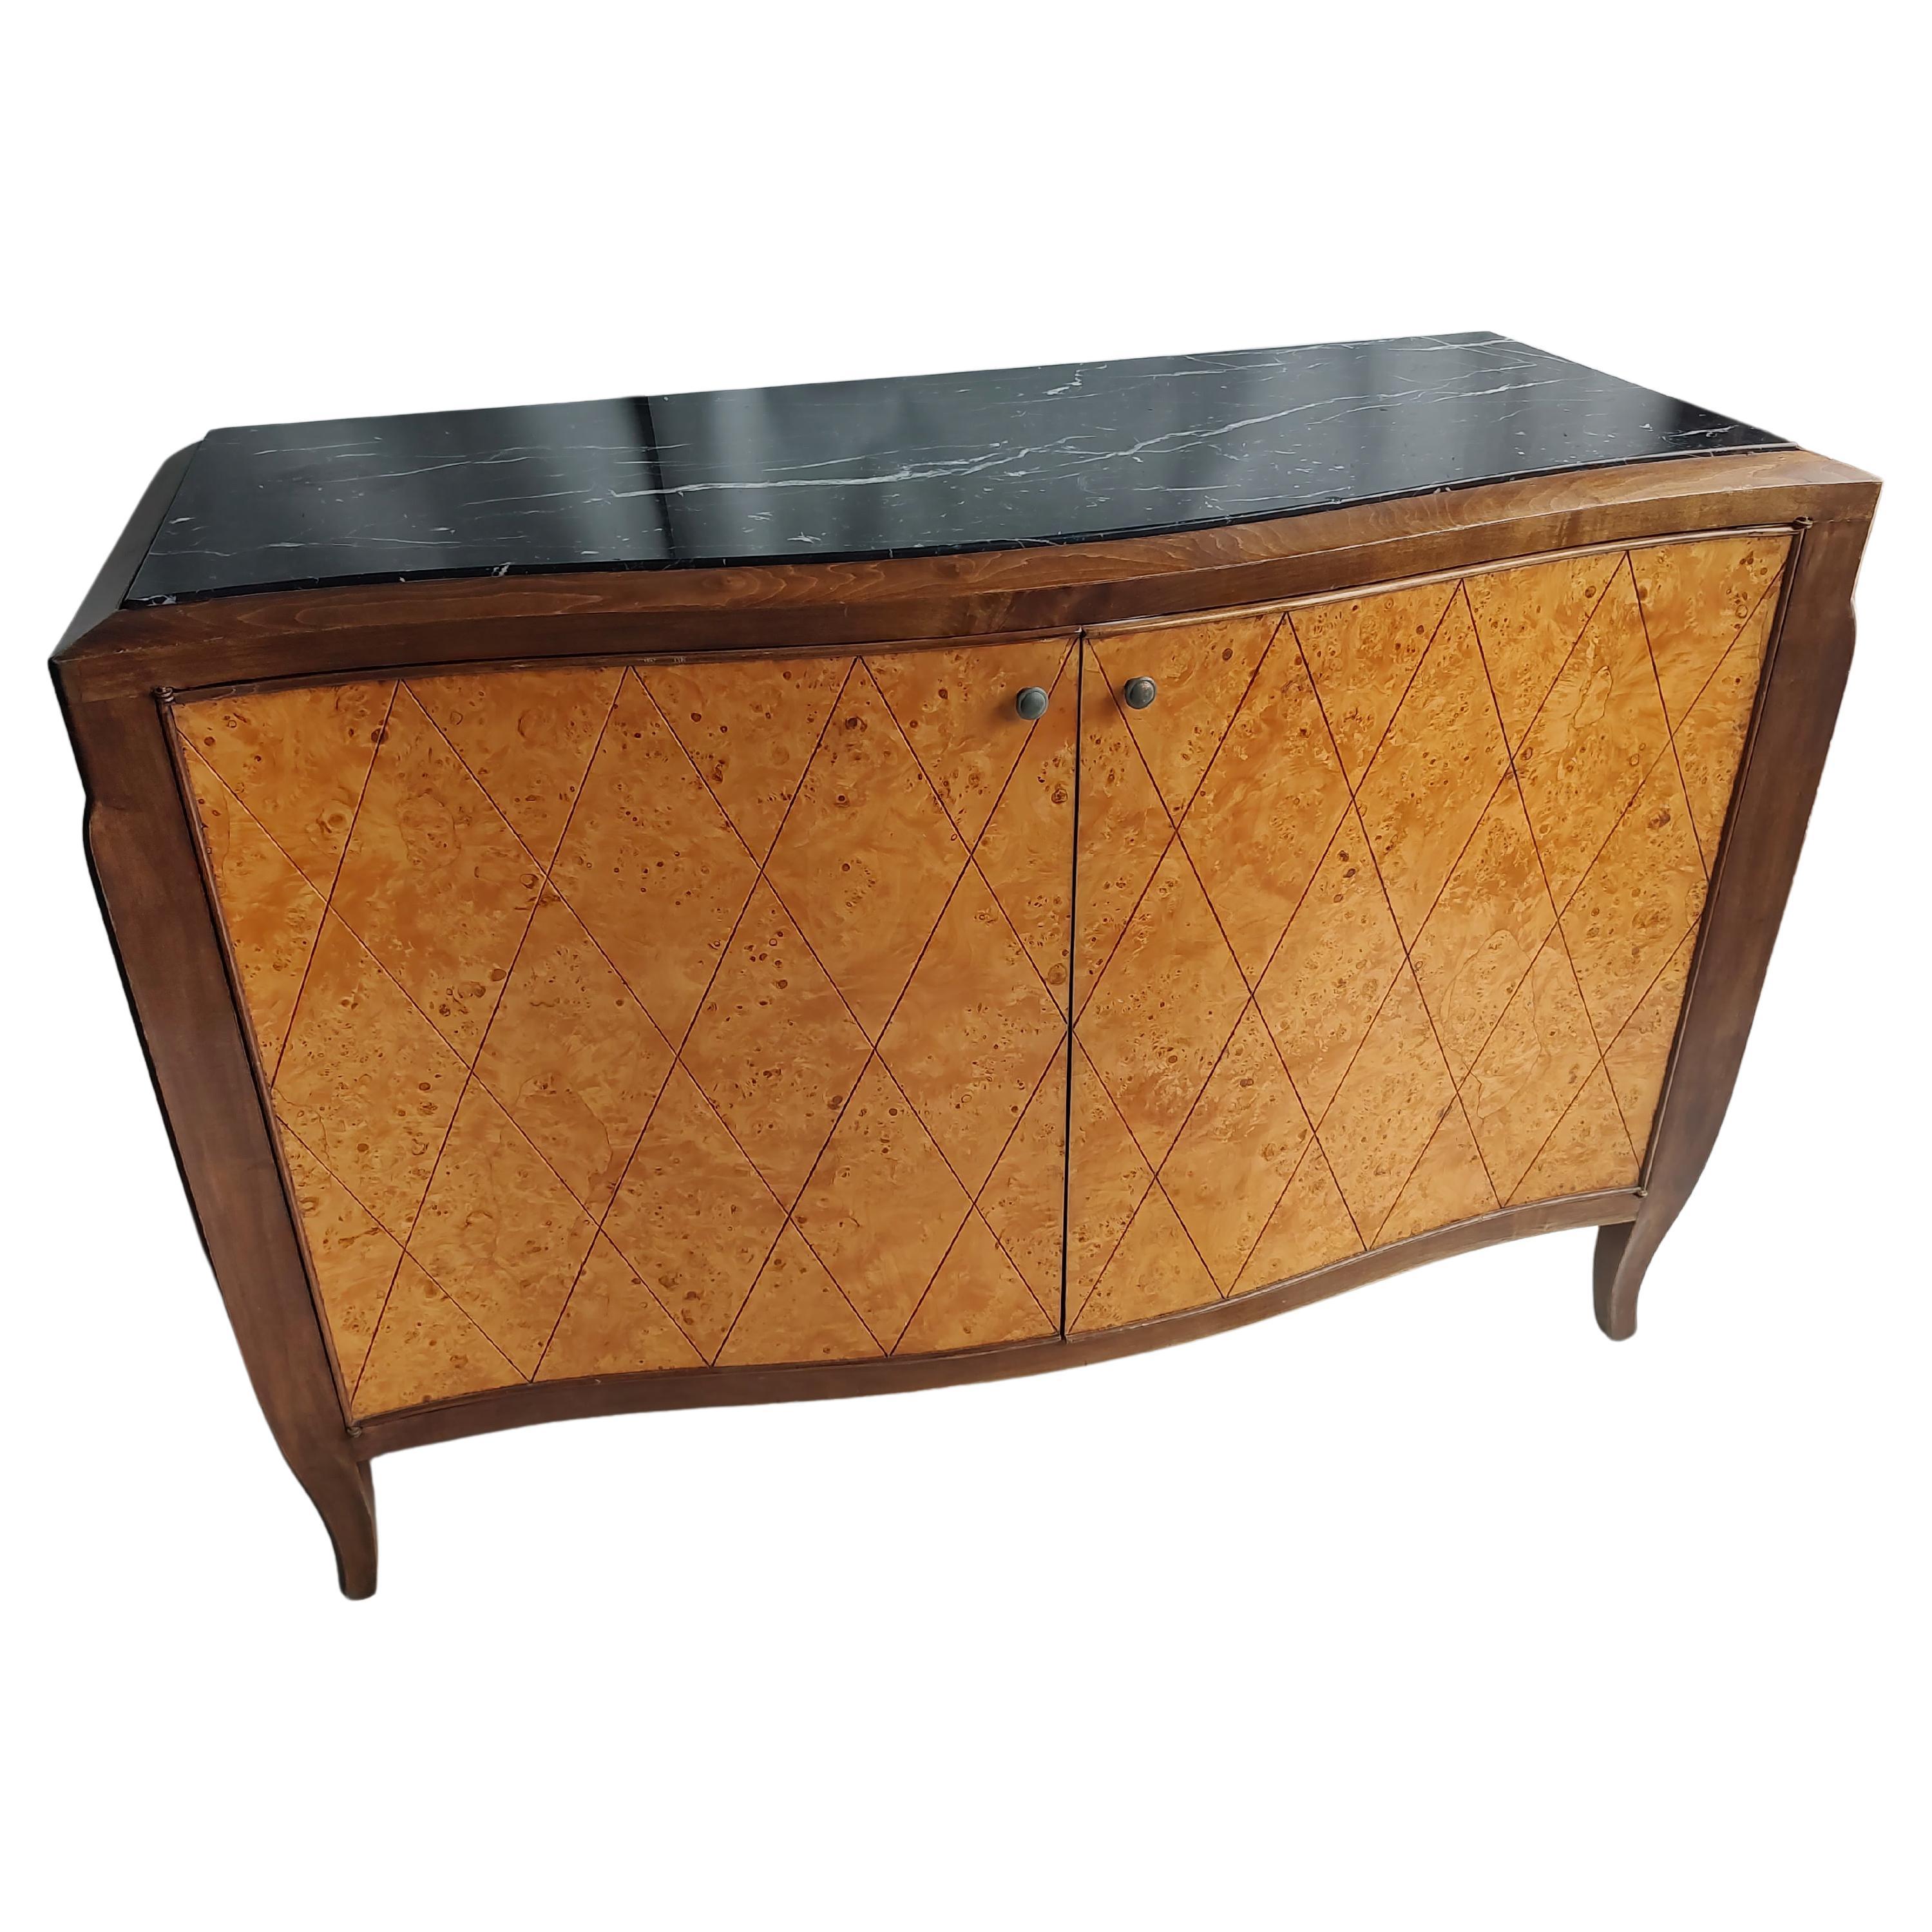 Fin du 20e siècle Mid Century Serpentine Burled Olive Wood Marble Top Bloomingdale's Made in Italy en vente